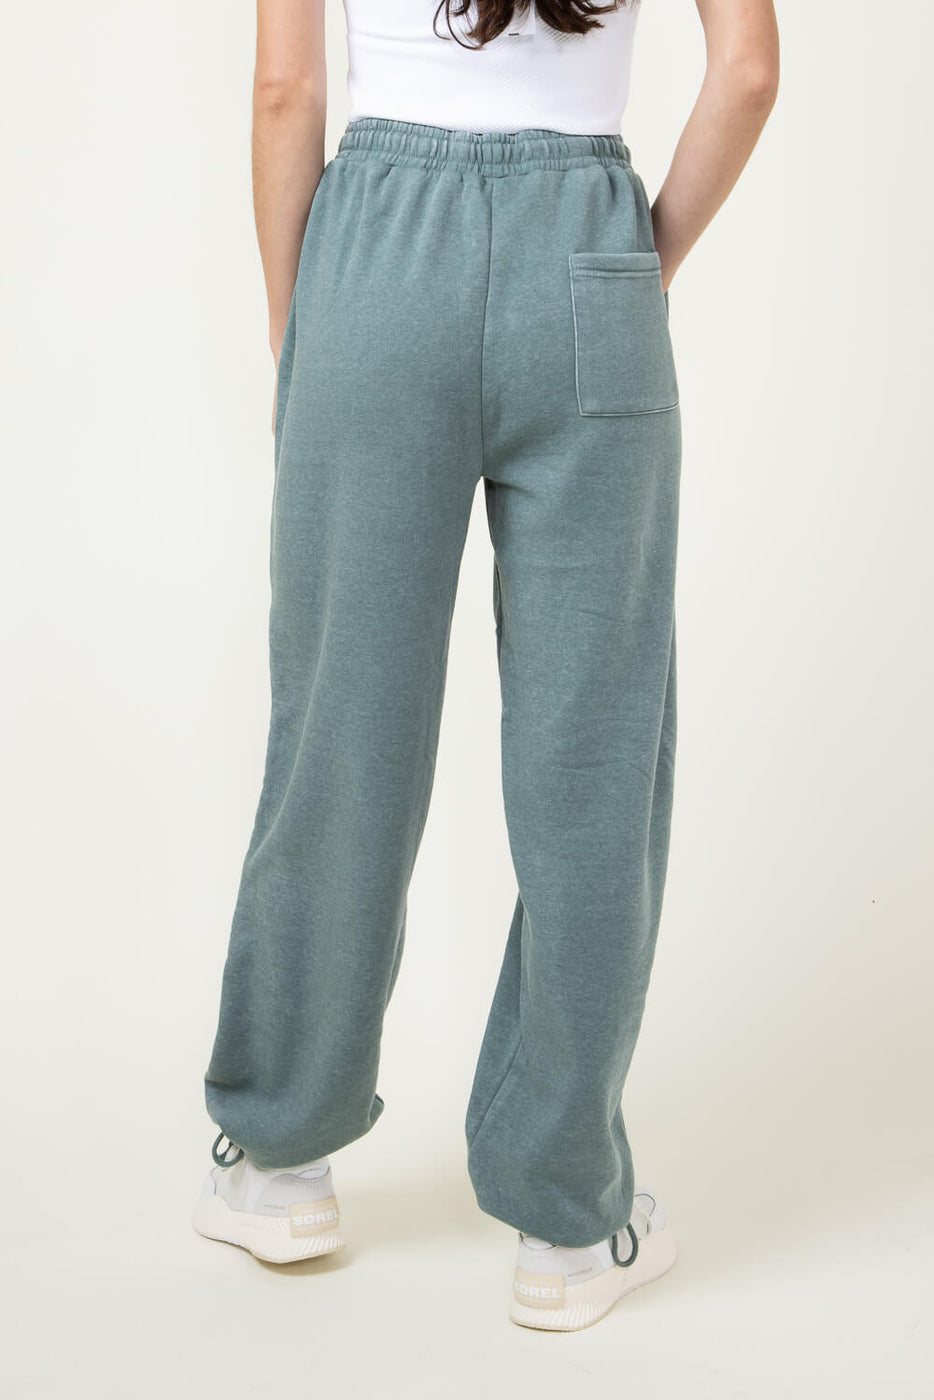 Extra Stitched Wide Leg Sweatpants for Women in Green | DZ24A840 